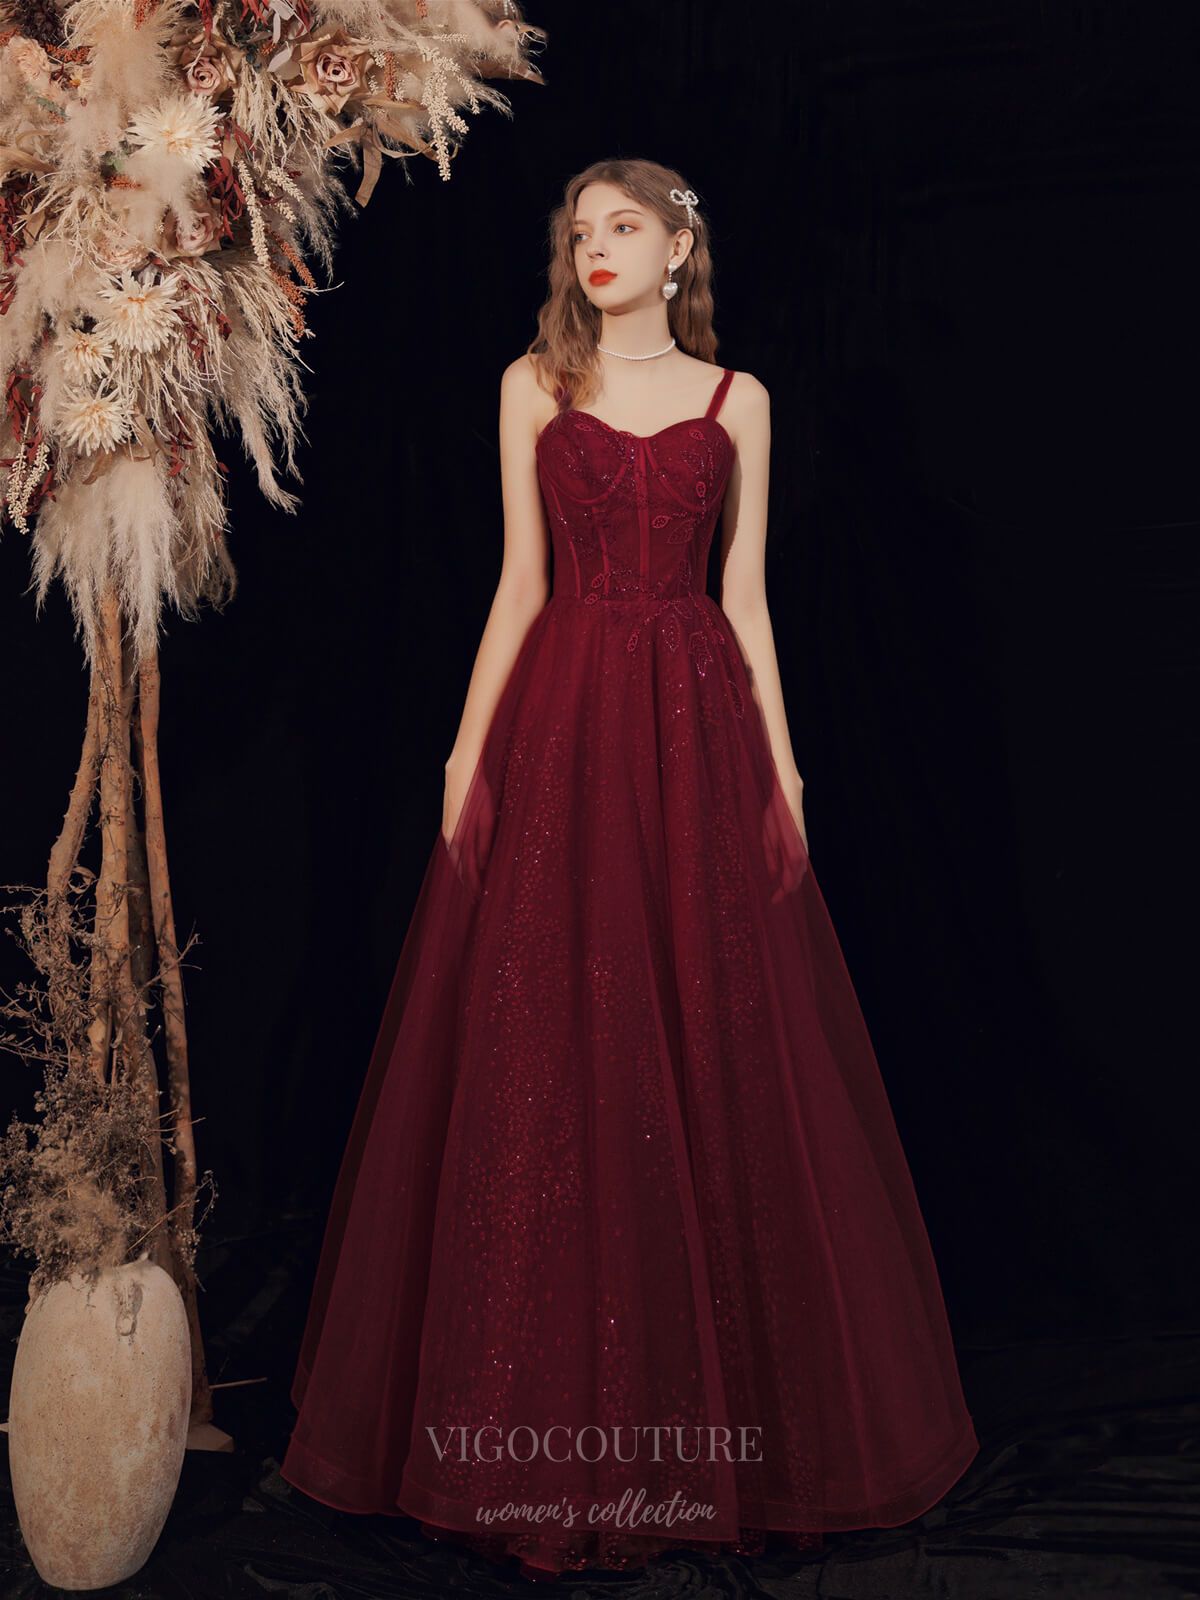 vigocouture-Burgundy Sparkly Tulle Beaded Prom Dress 20717-Prom Dresses-vigocouture-Burgundy-US2-